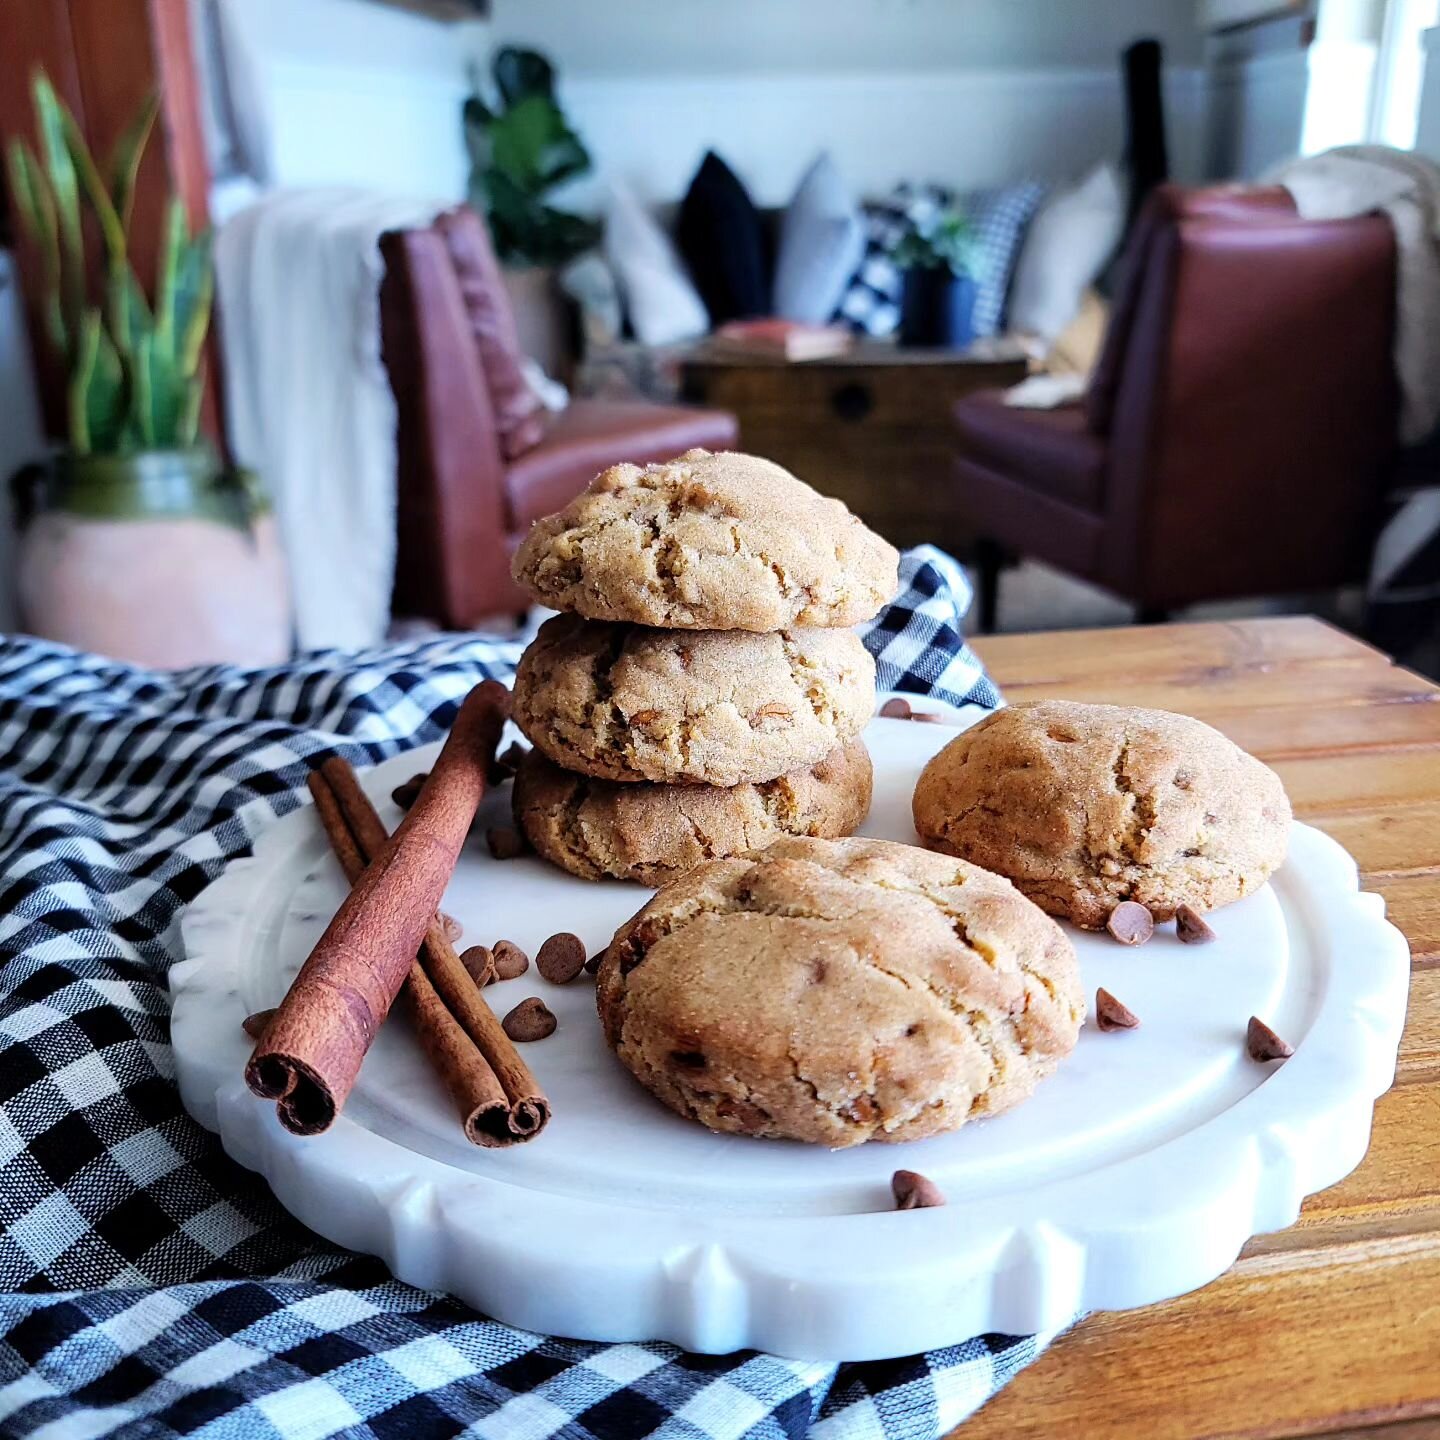 My all-time #1 FAVORITE cookie I make! 
I dream about this cookie. Seriously 😍

🍪The Snickerdoodle🍪

This is not your ordinary Snickerdoodle....

#artisancookies #cookiesofinstagram #snickerdoodle #snickerdoodlecookies #eatcookies #cookies #delici